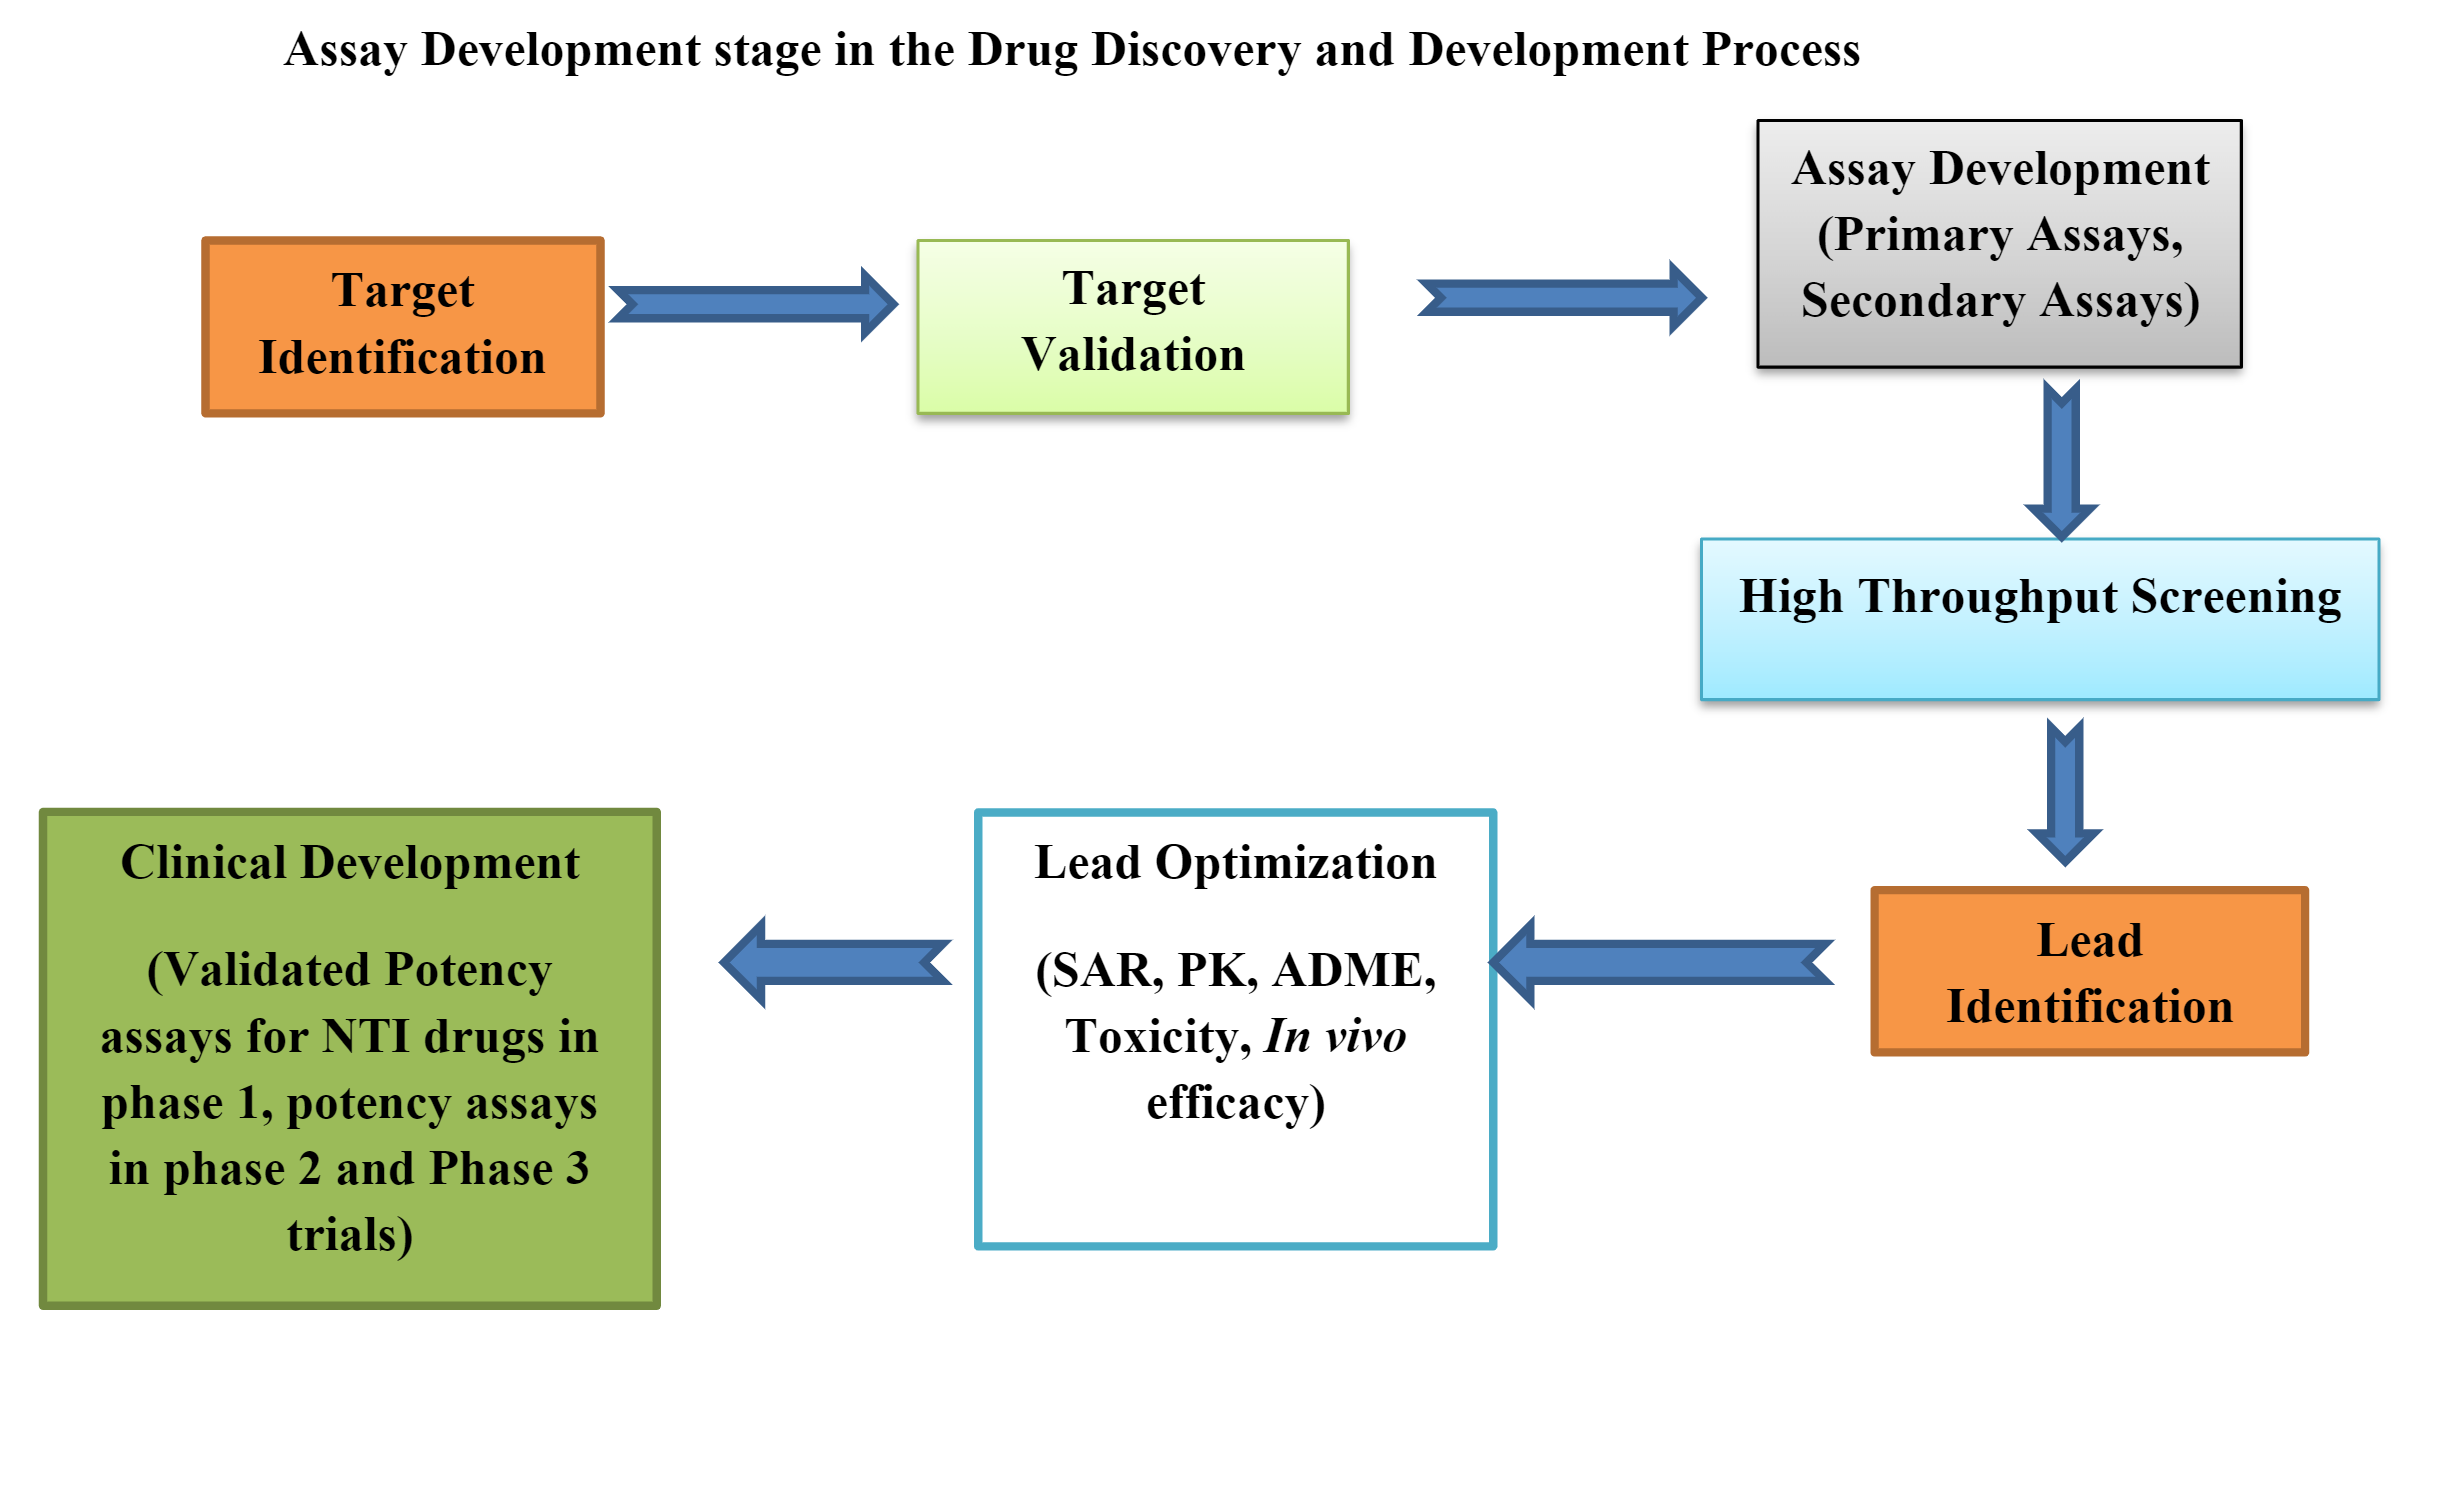 Chart Diagram of Assay Development Stage in the Drug Discovery and Development Process